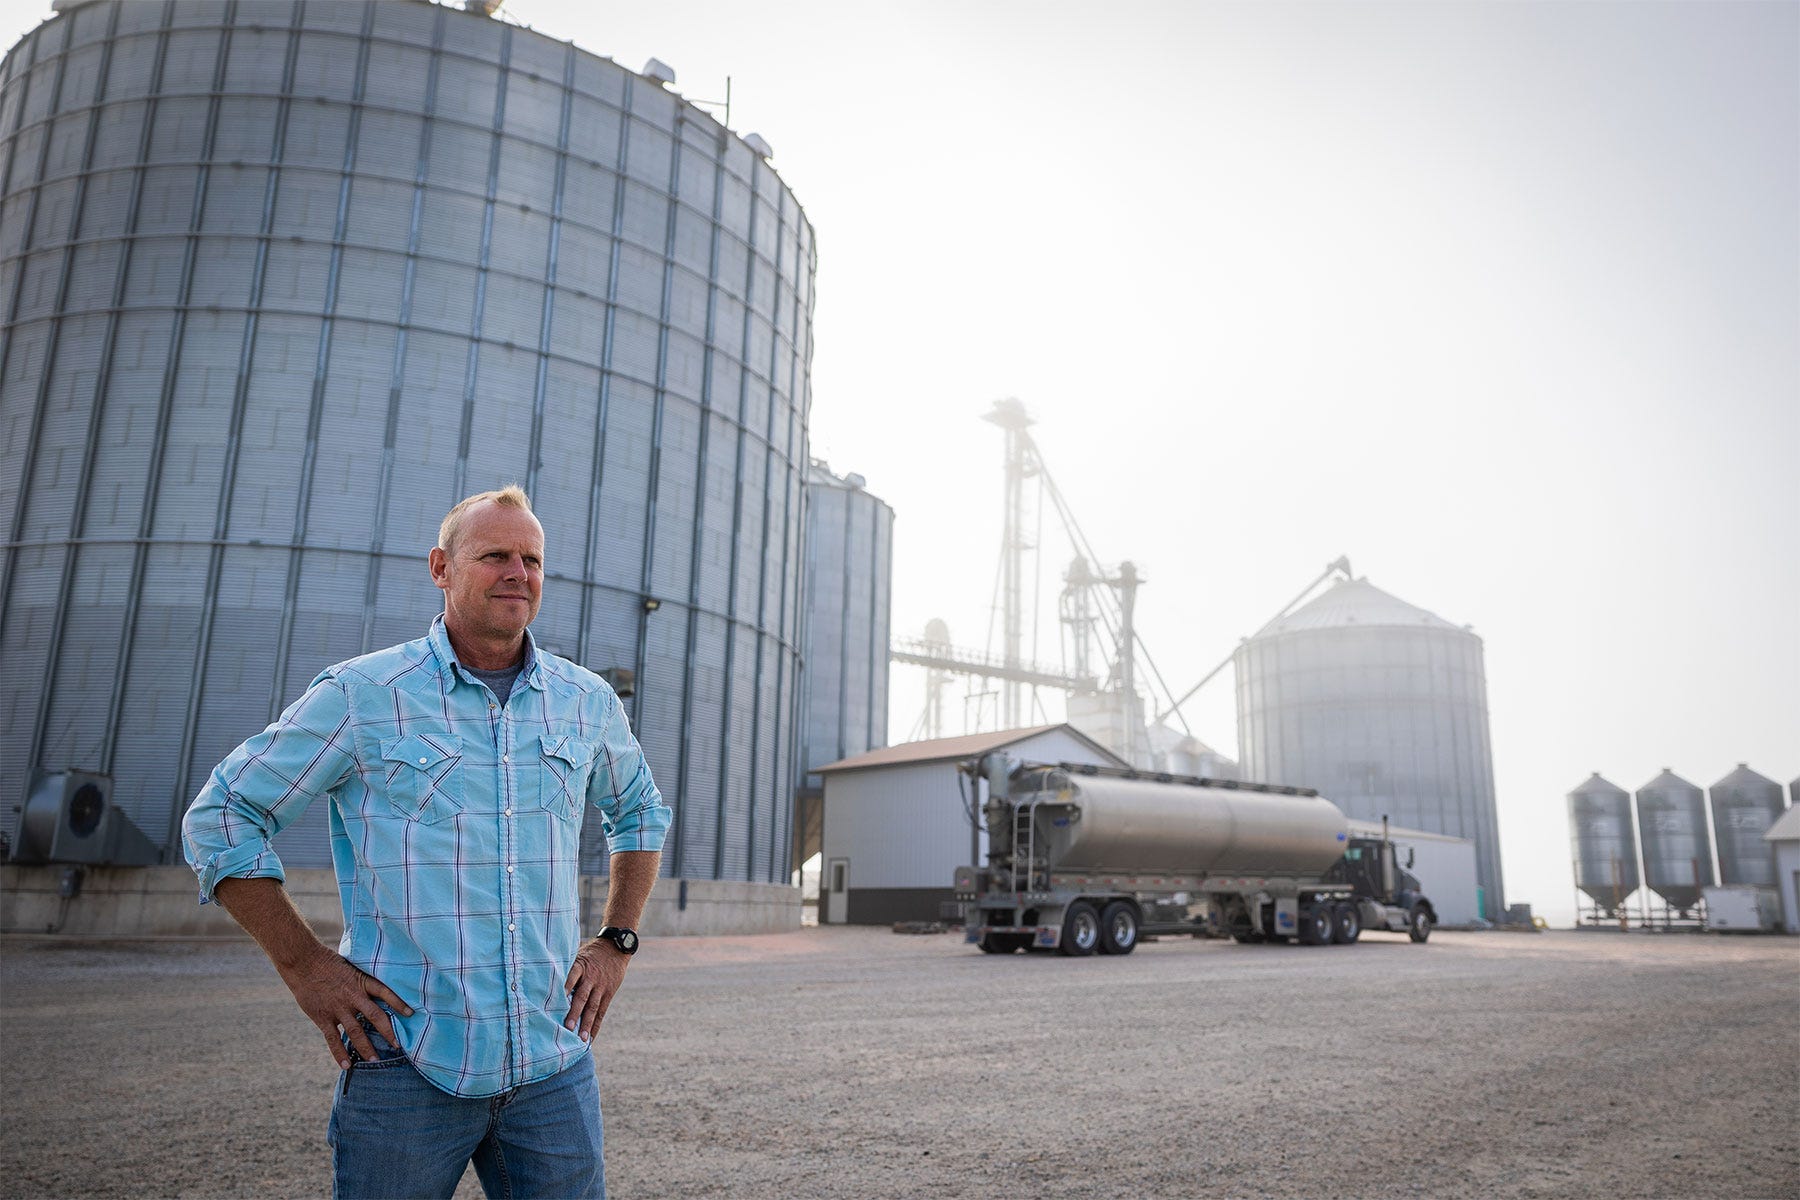 farmer standing with hands on hips in front of grain center and semitruck